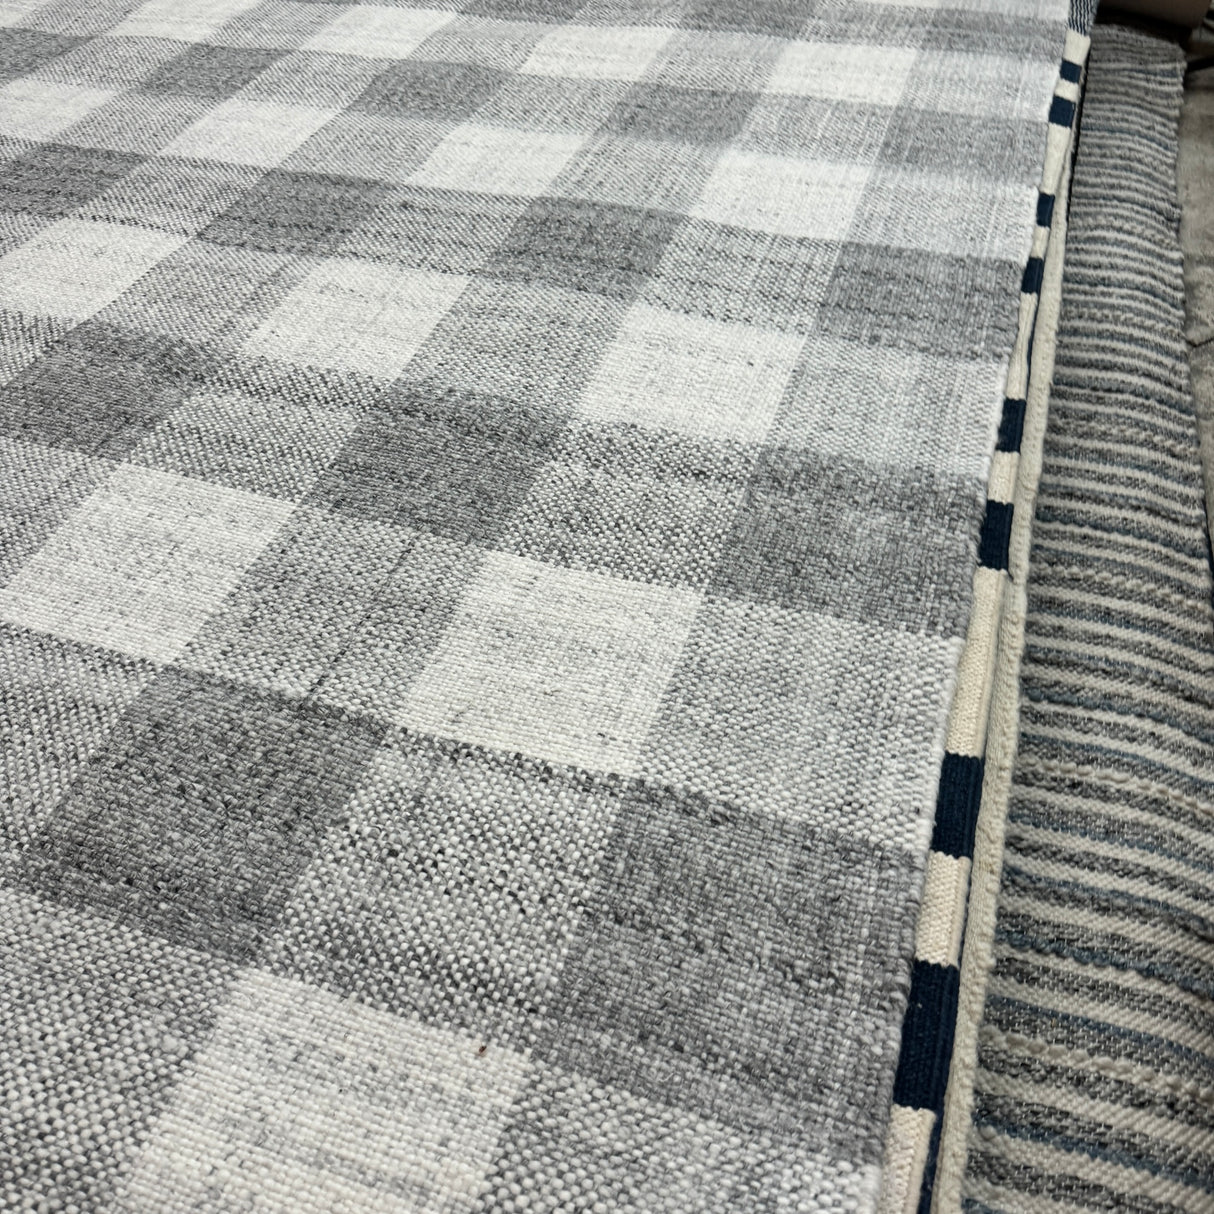 New! Serena and Lily 8x10 Gingham rug